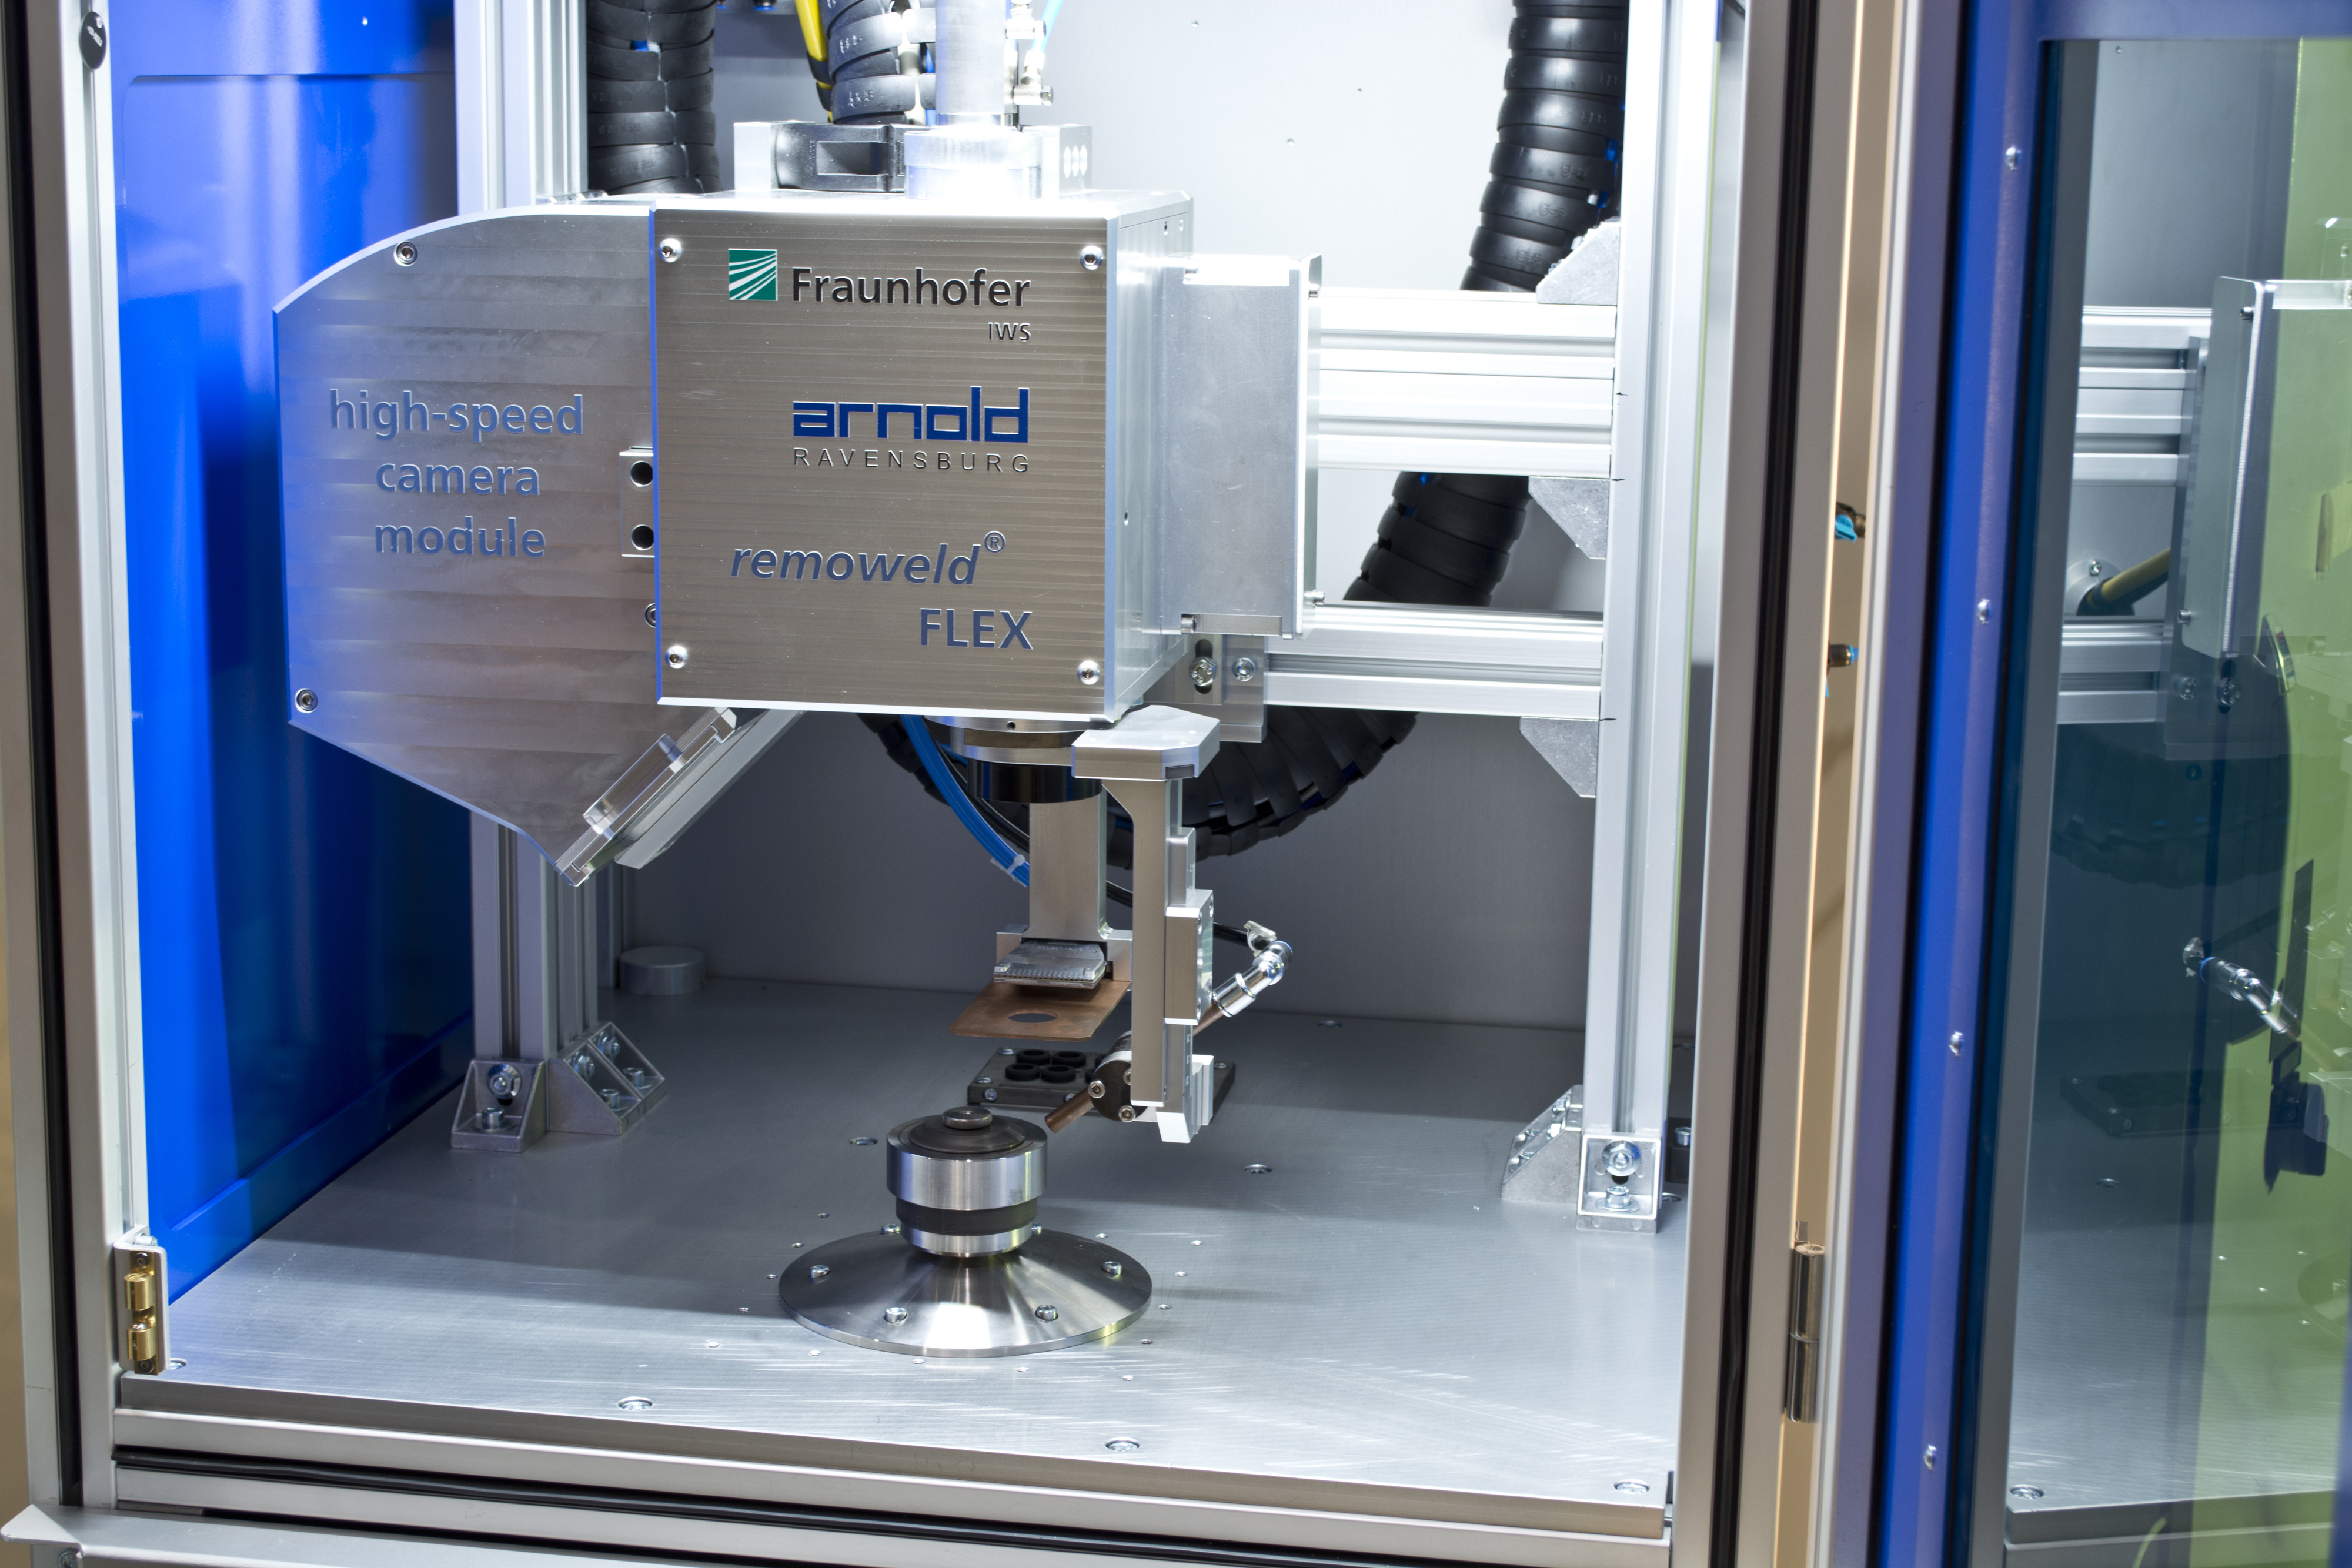 The Fraunhofer IWS technology known as "remoweld®FLEX" is suitable for particularly demanding processes, especially for components to be sealed media-tight against water and other undesirable environmental influences.